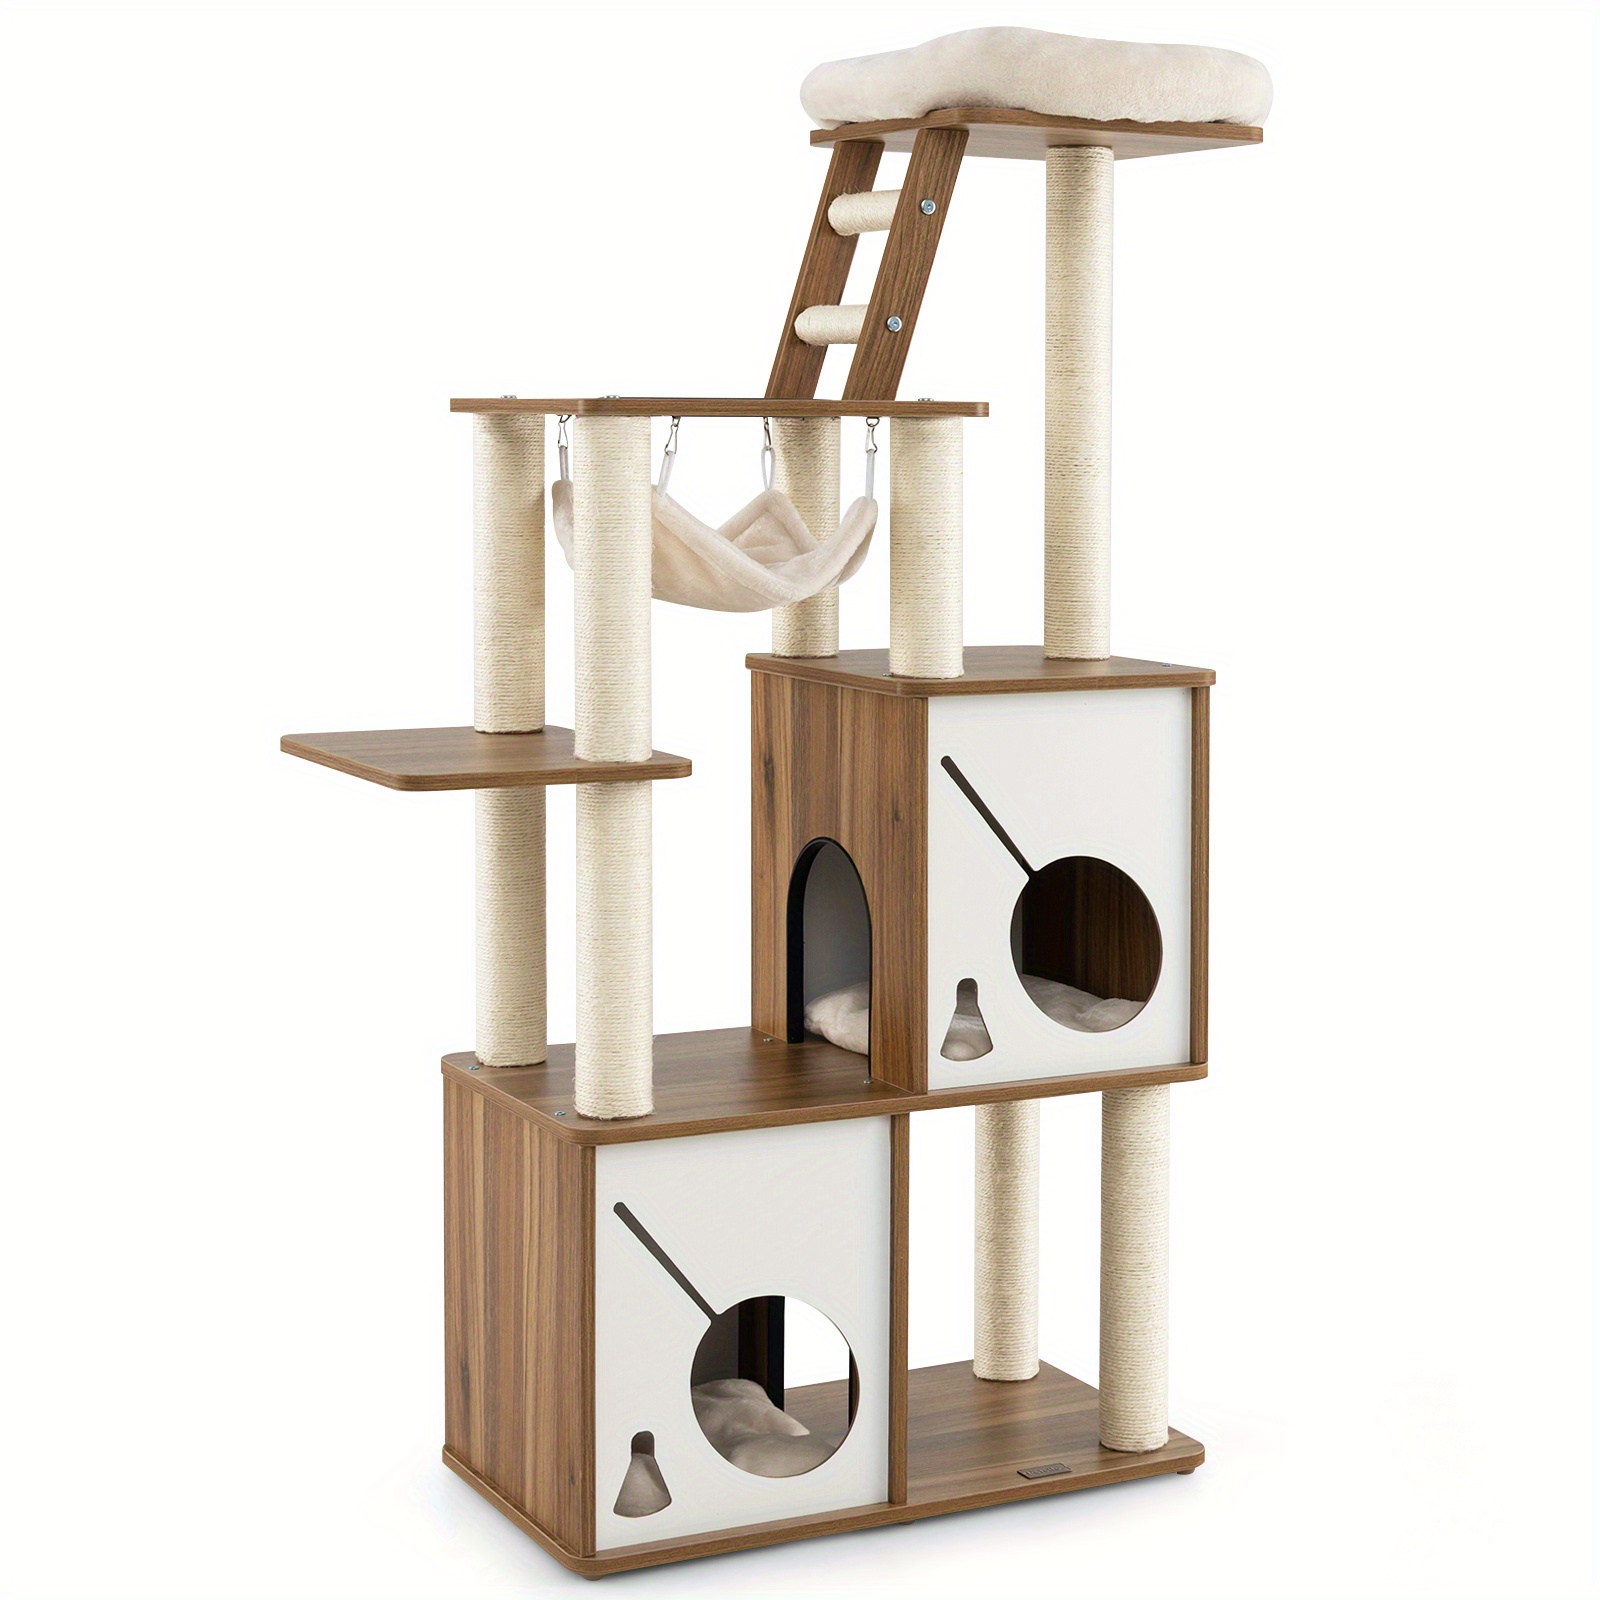 

Lifezeal 57" Cat Tree Tower Multi-level Activity Center W/ Scratching Posts Perch Ladder